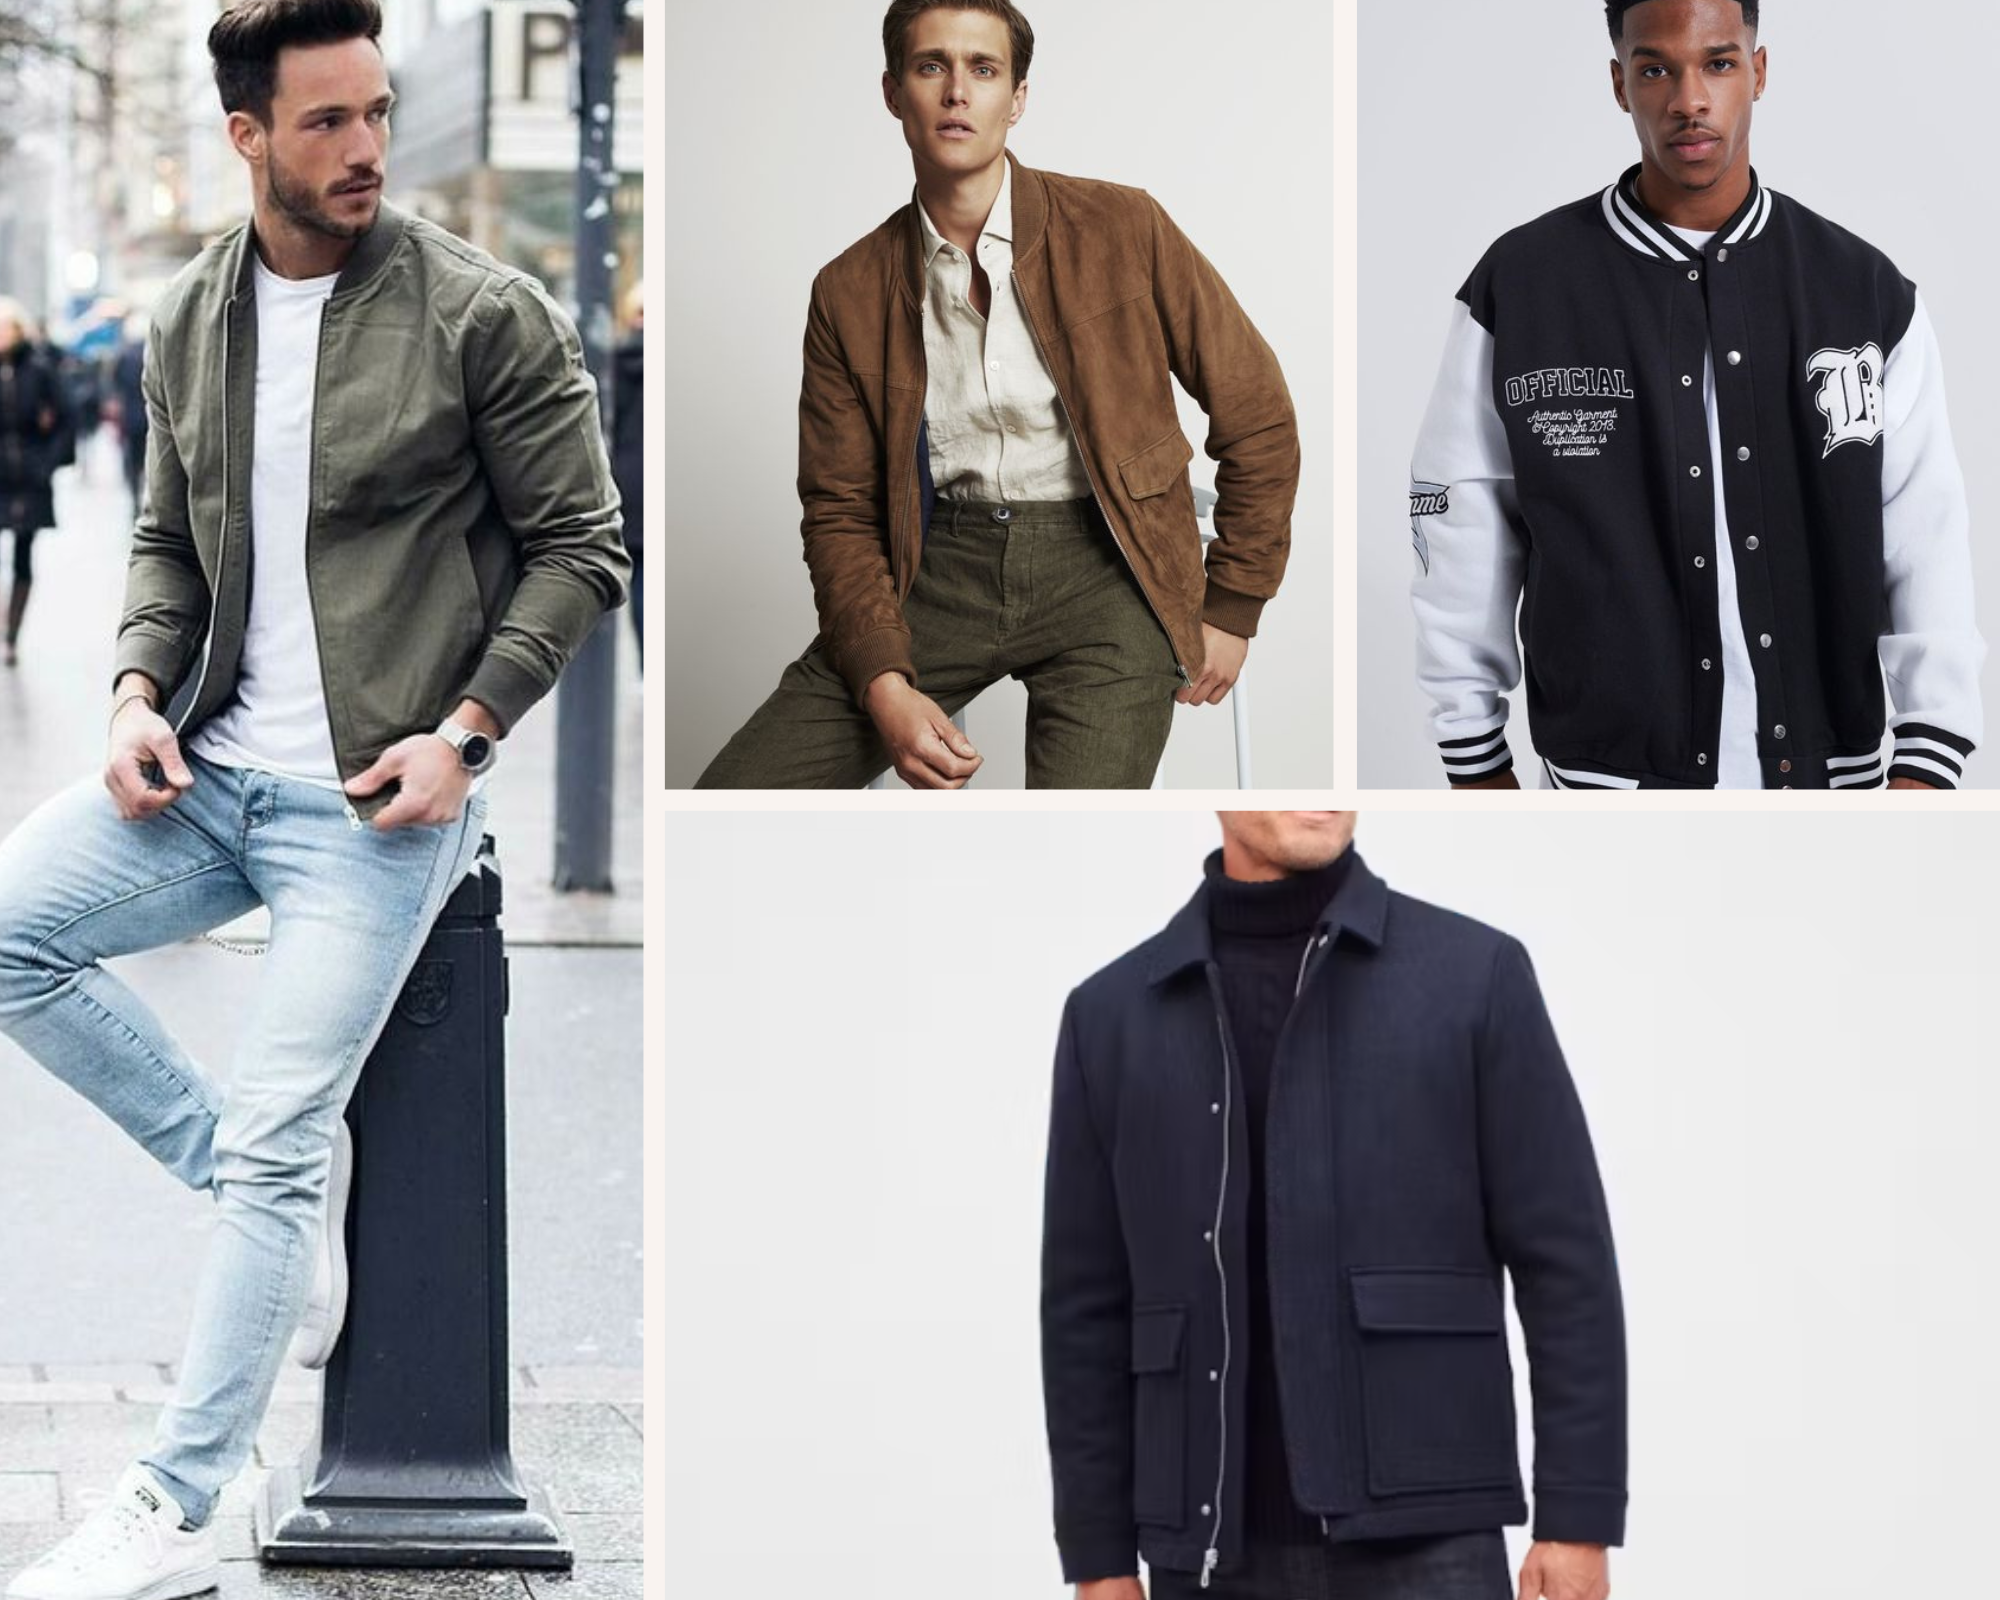 Stylist Q&A: How do I pick the right style of bomber jacket